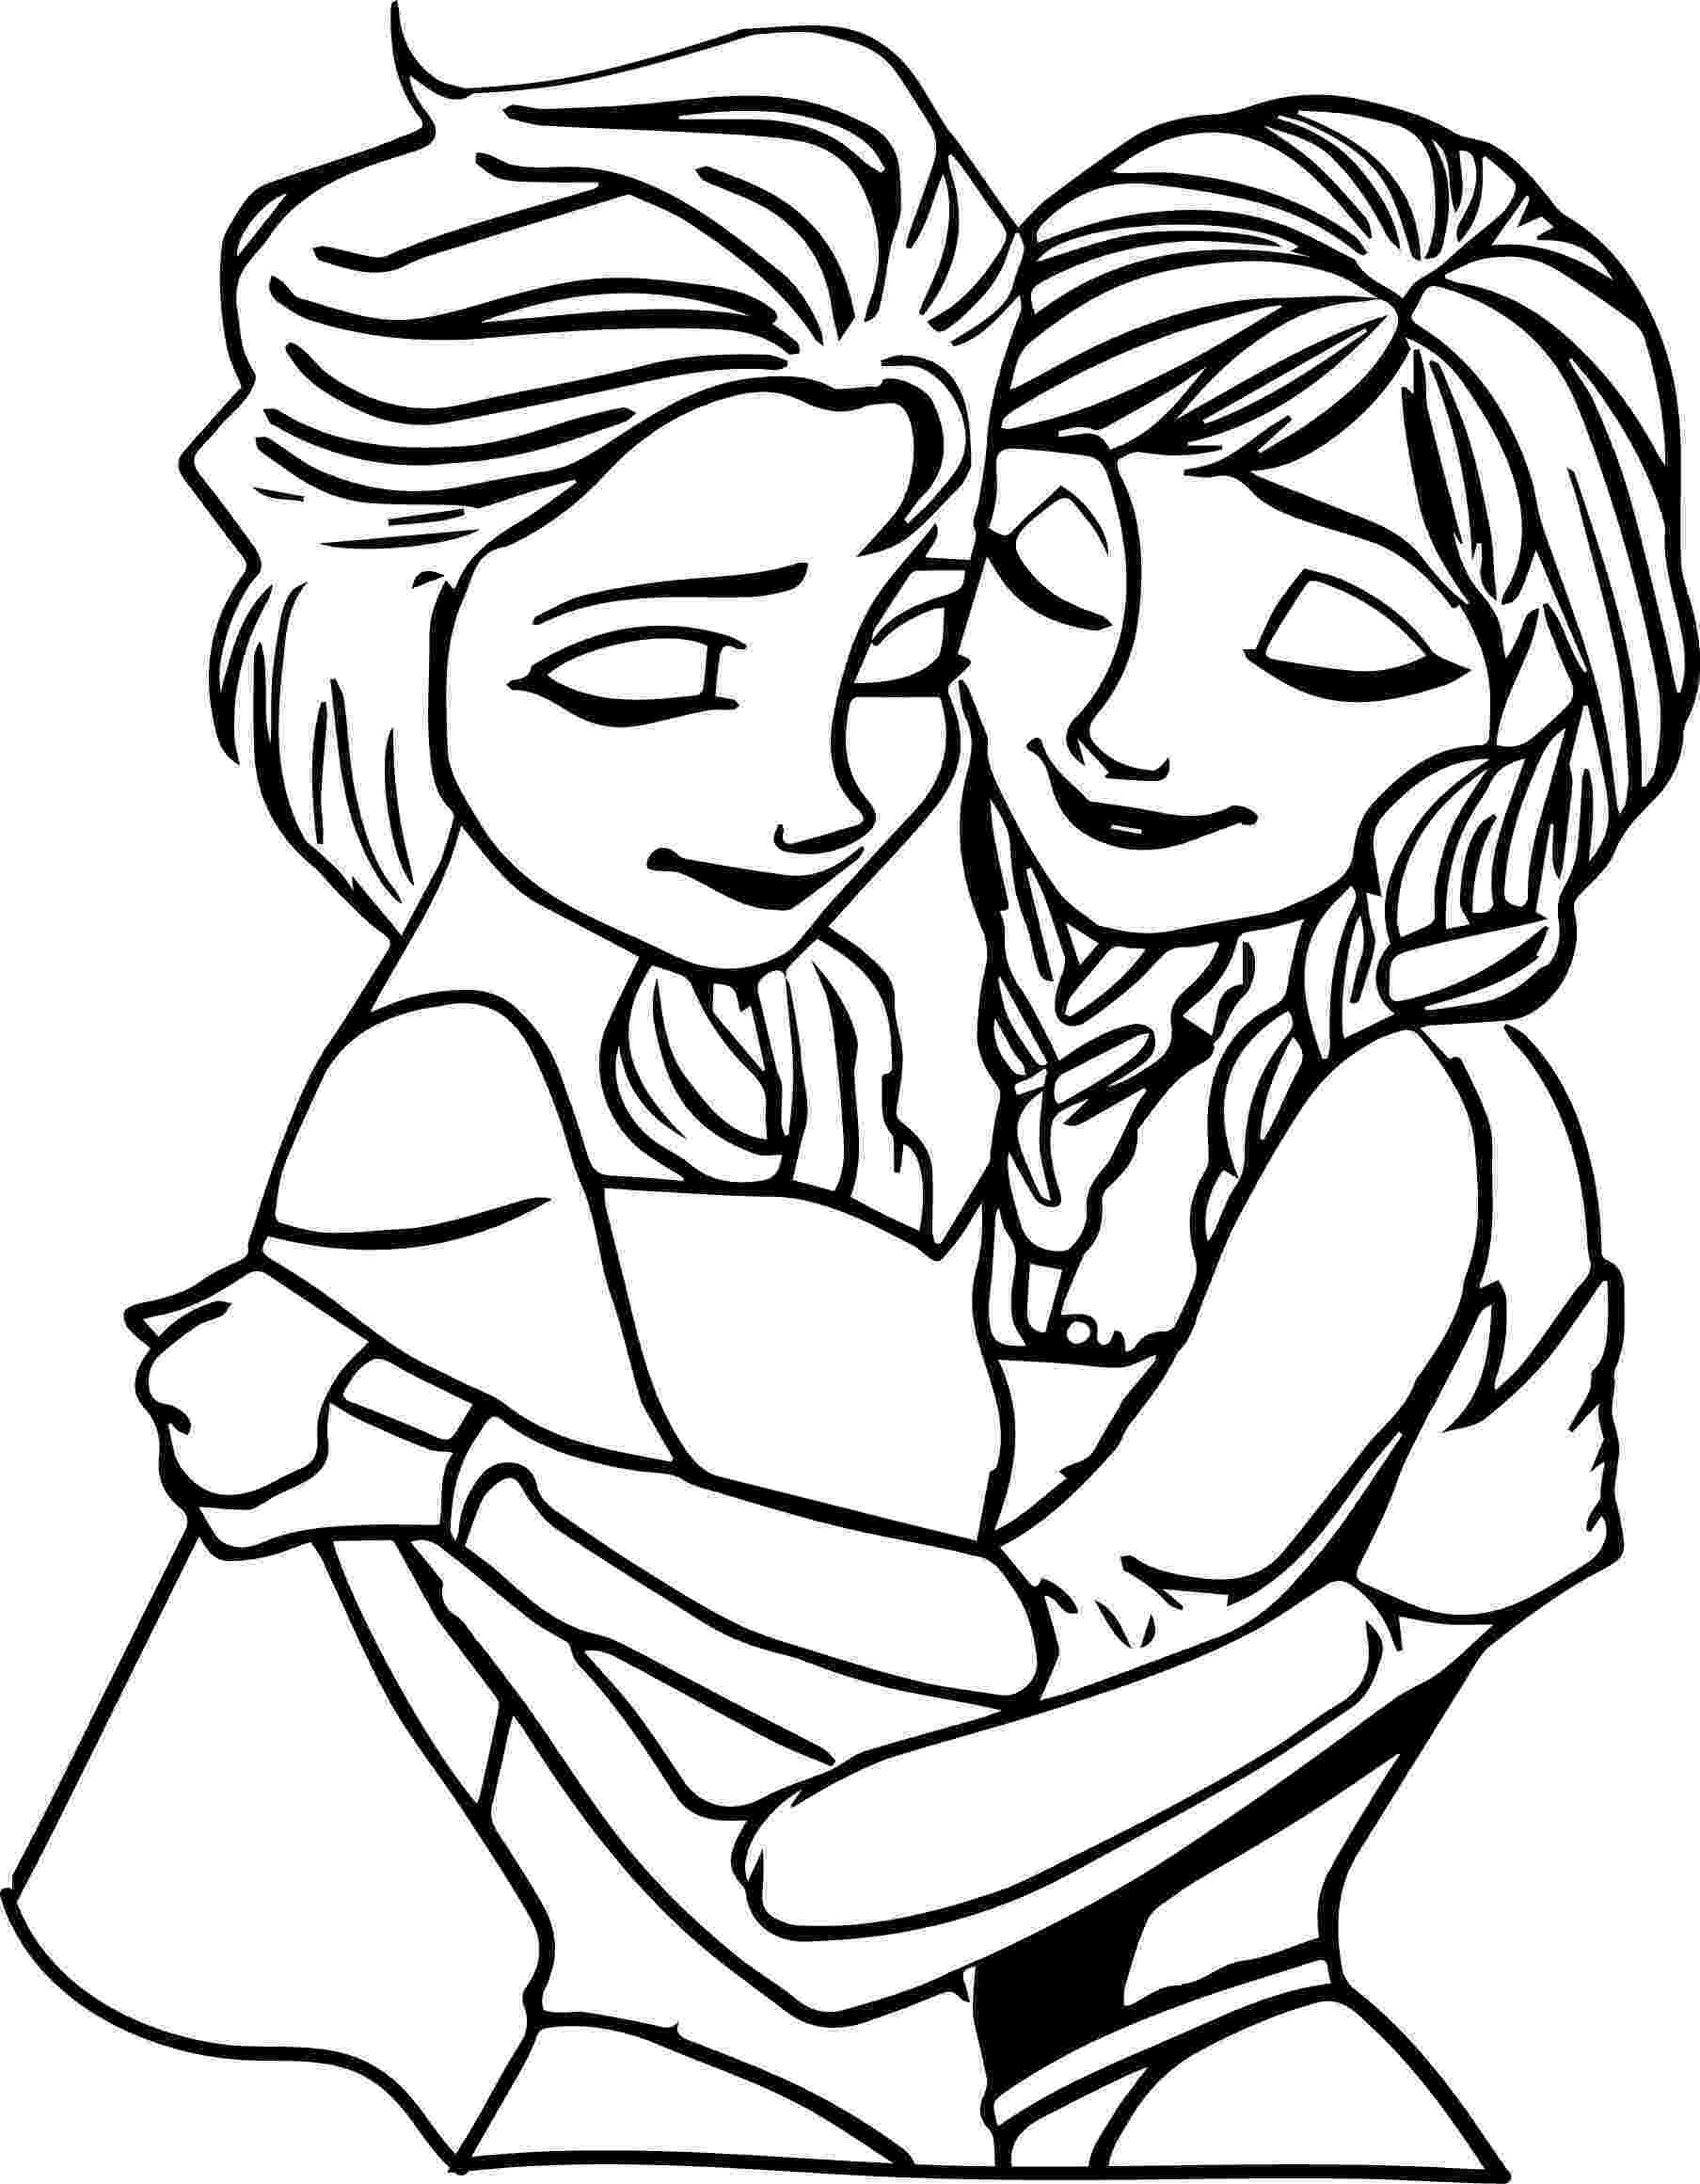 coloring pages of elsa elsa coloring pages free download best elsa coloring coloring of elsa pages 